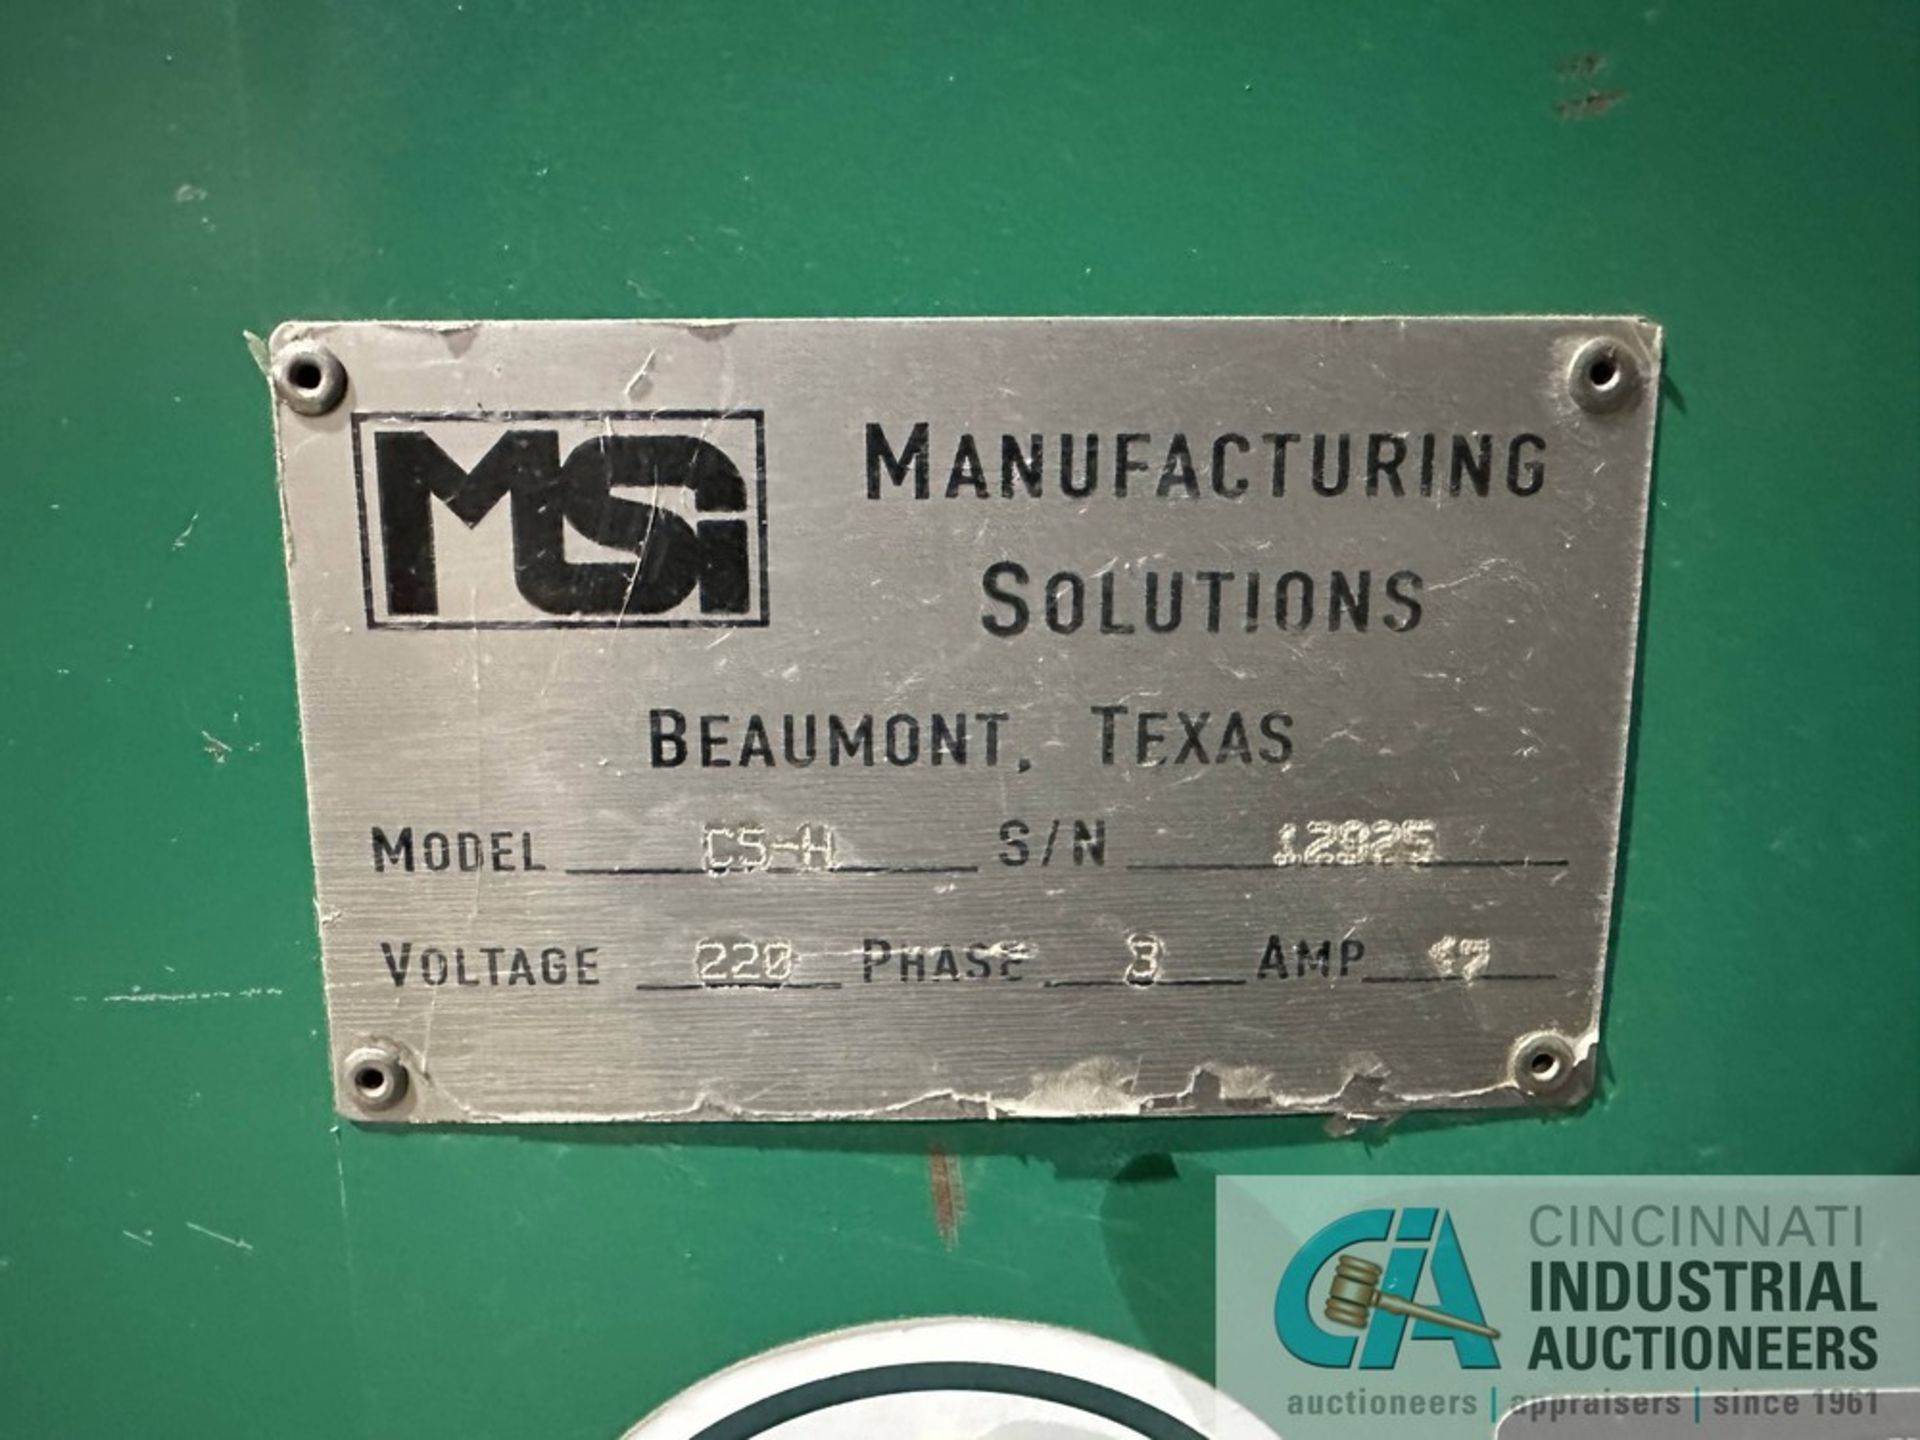 MSI Model C5-H ChamferMate Pipe Beveling and Deburring Machine; S/N 12925 - Image 8 of 8